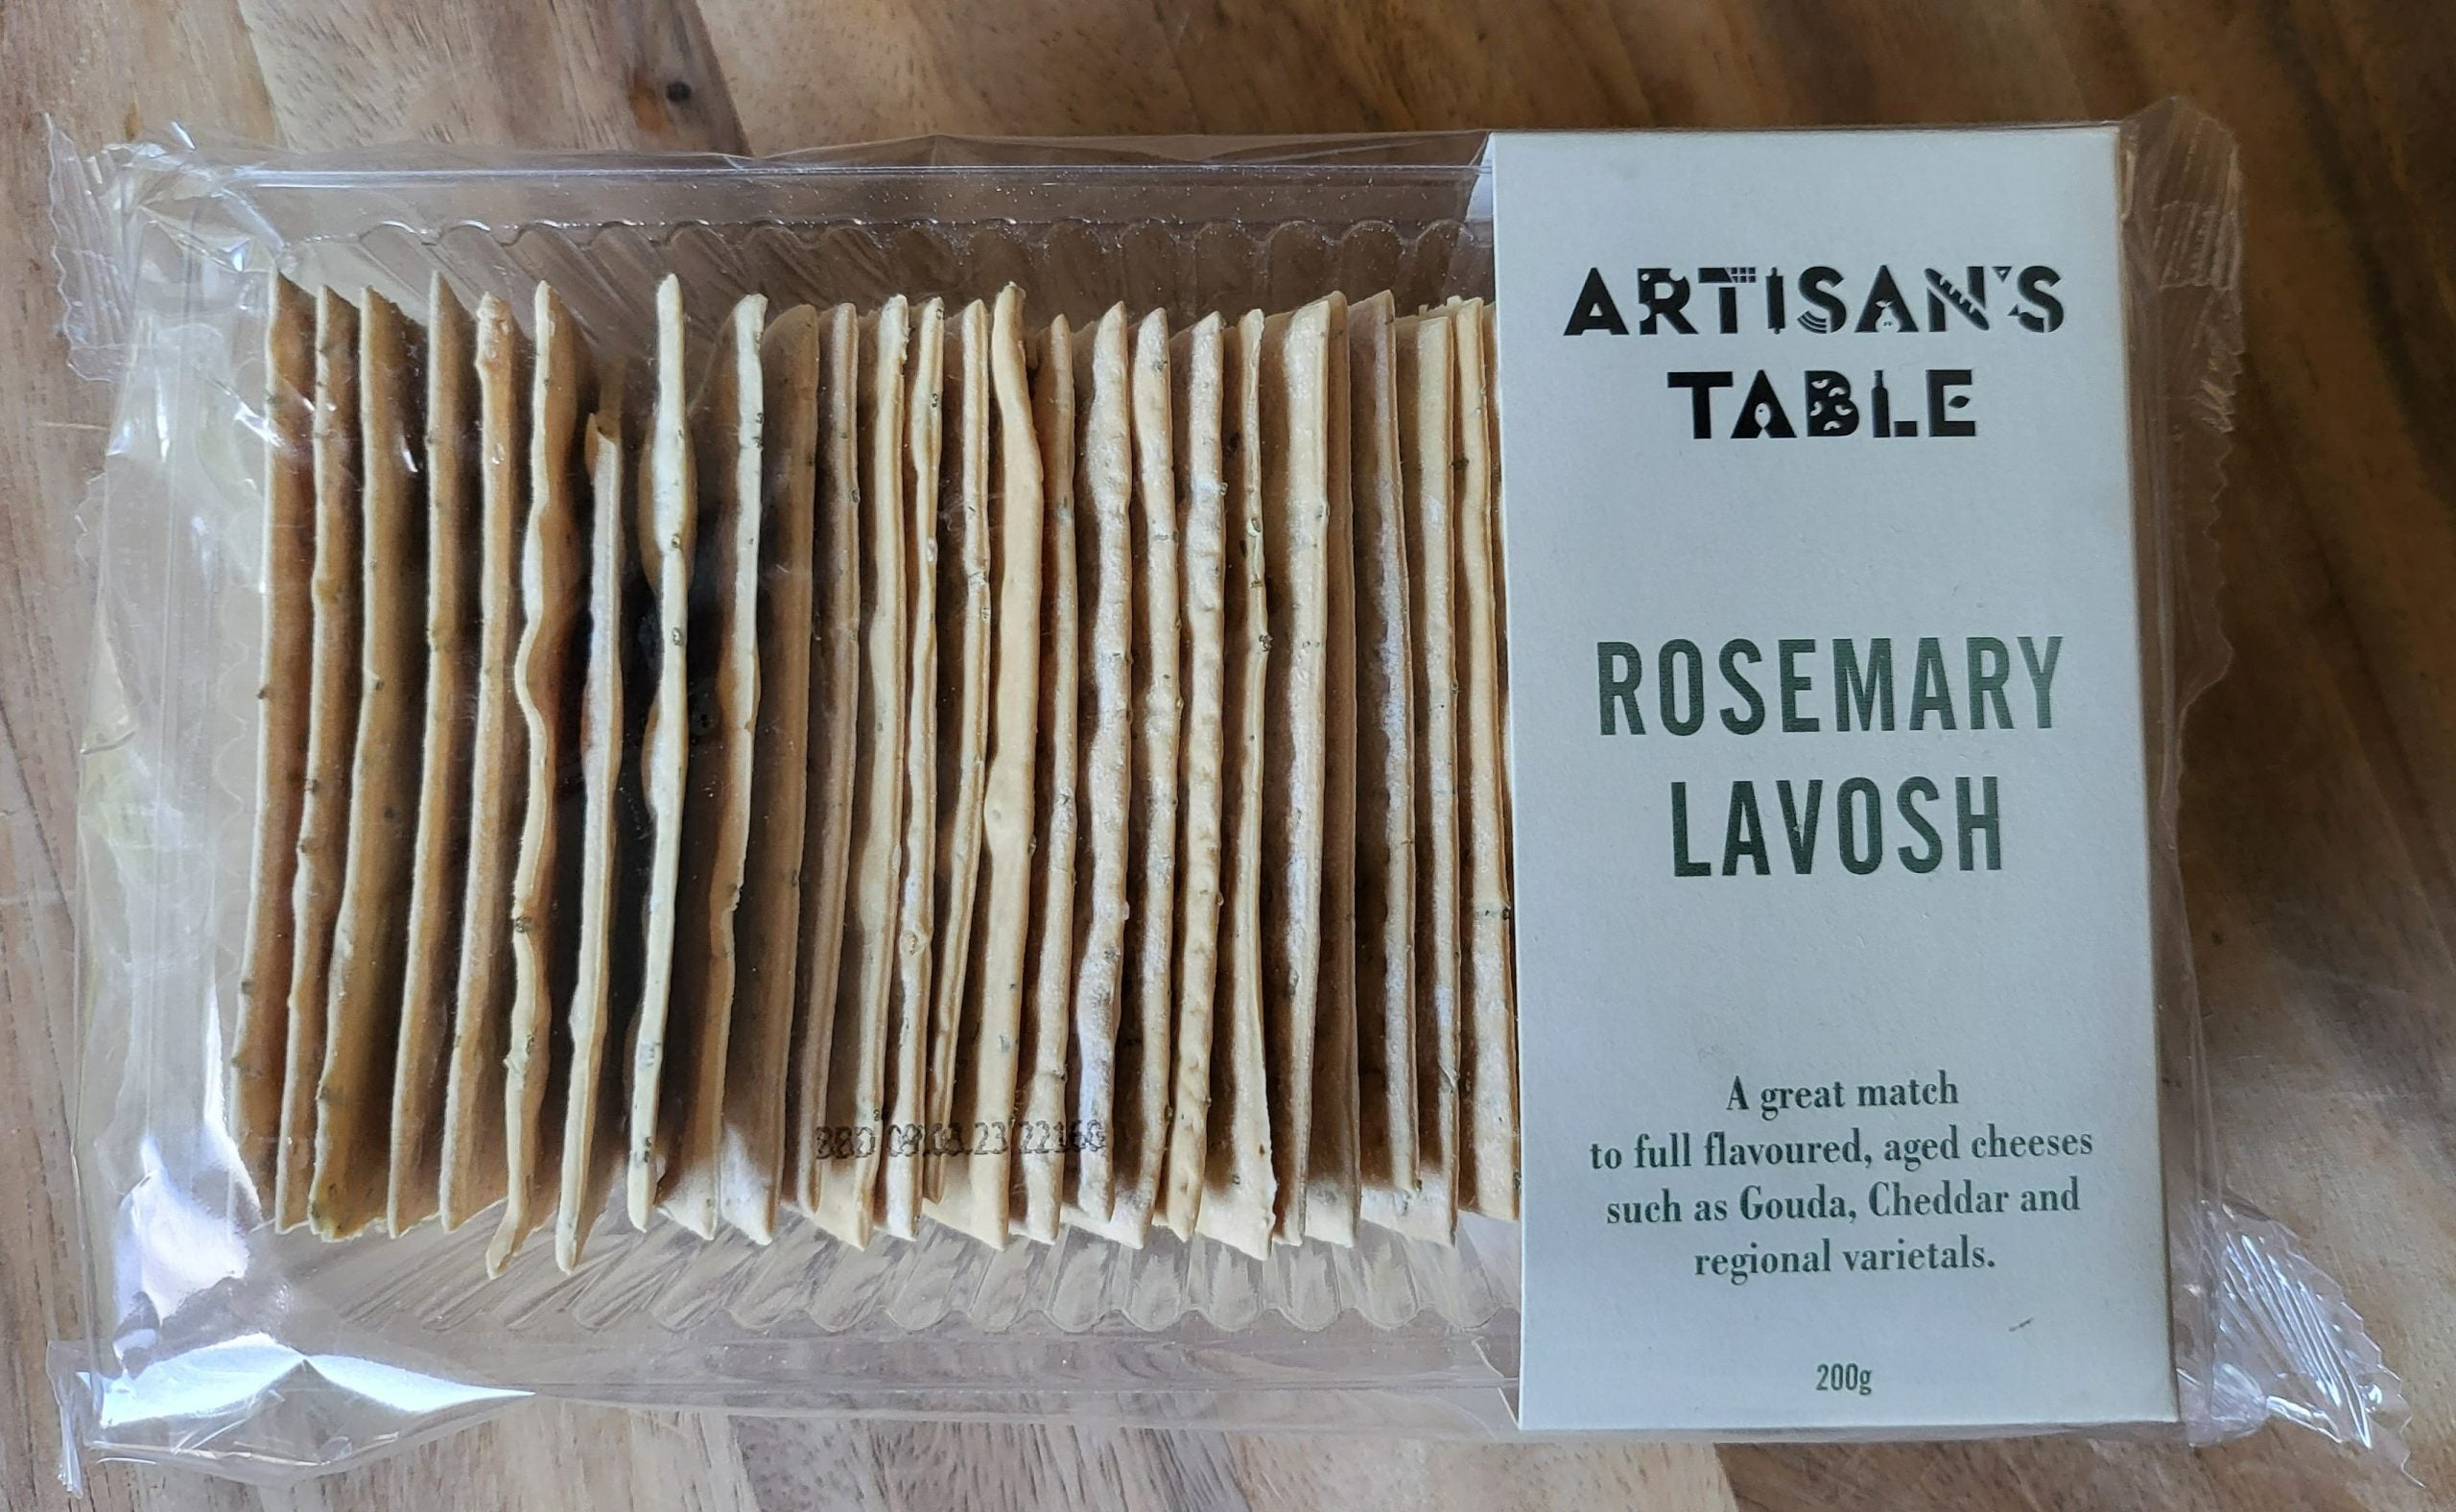 The Artisan’s Table Rosemary Lavosh 200g